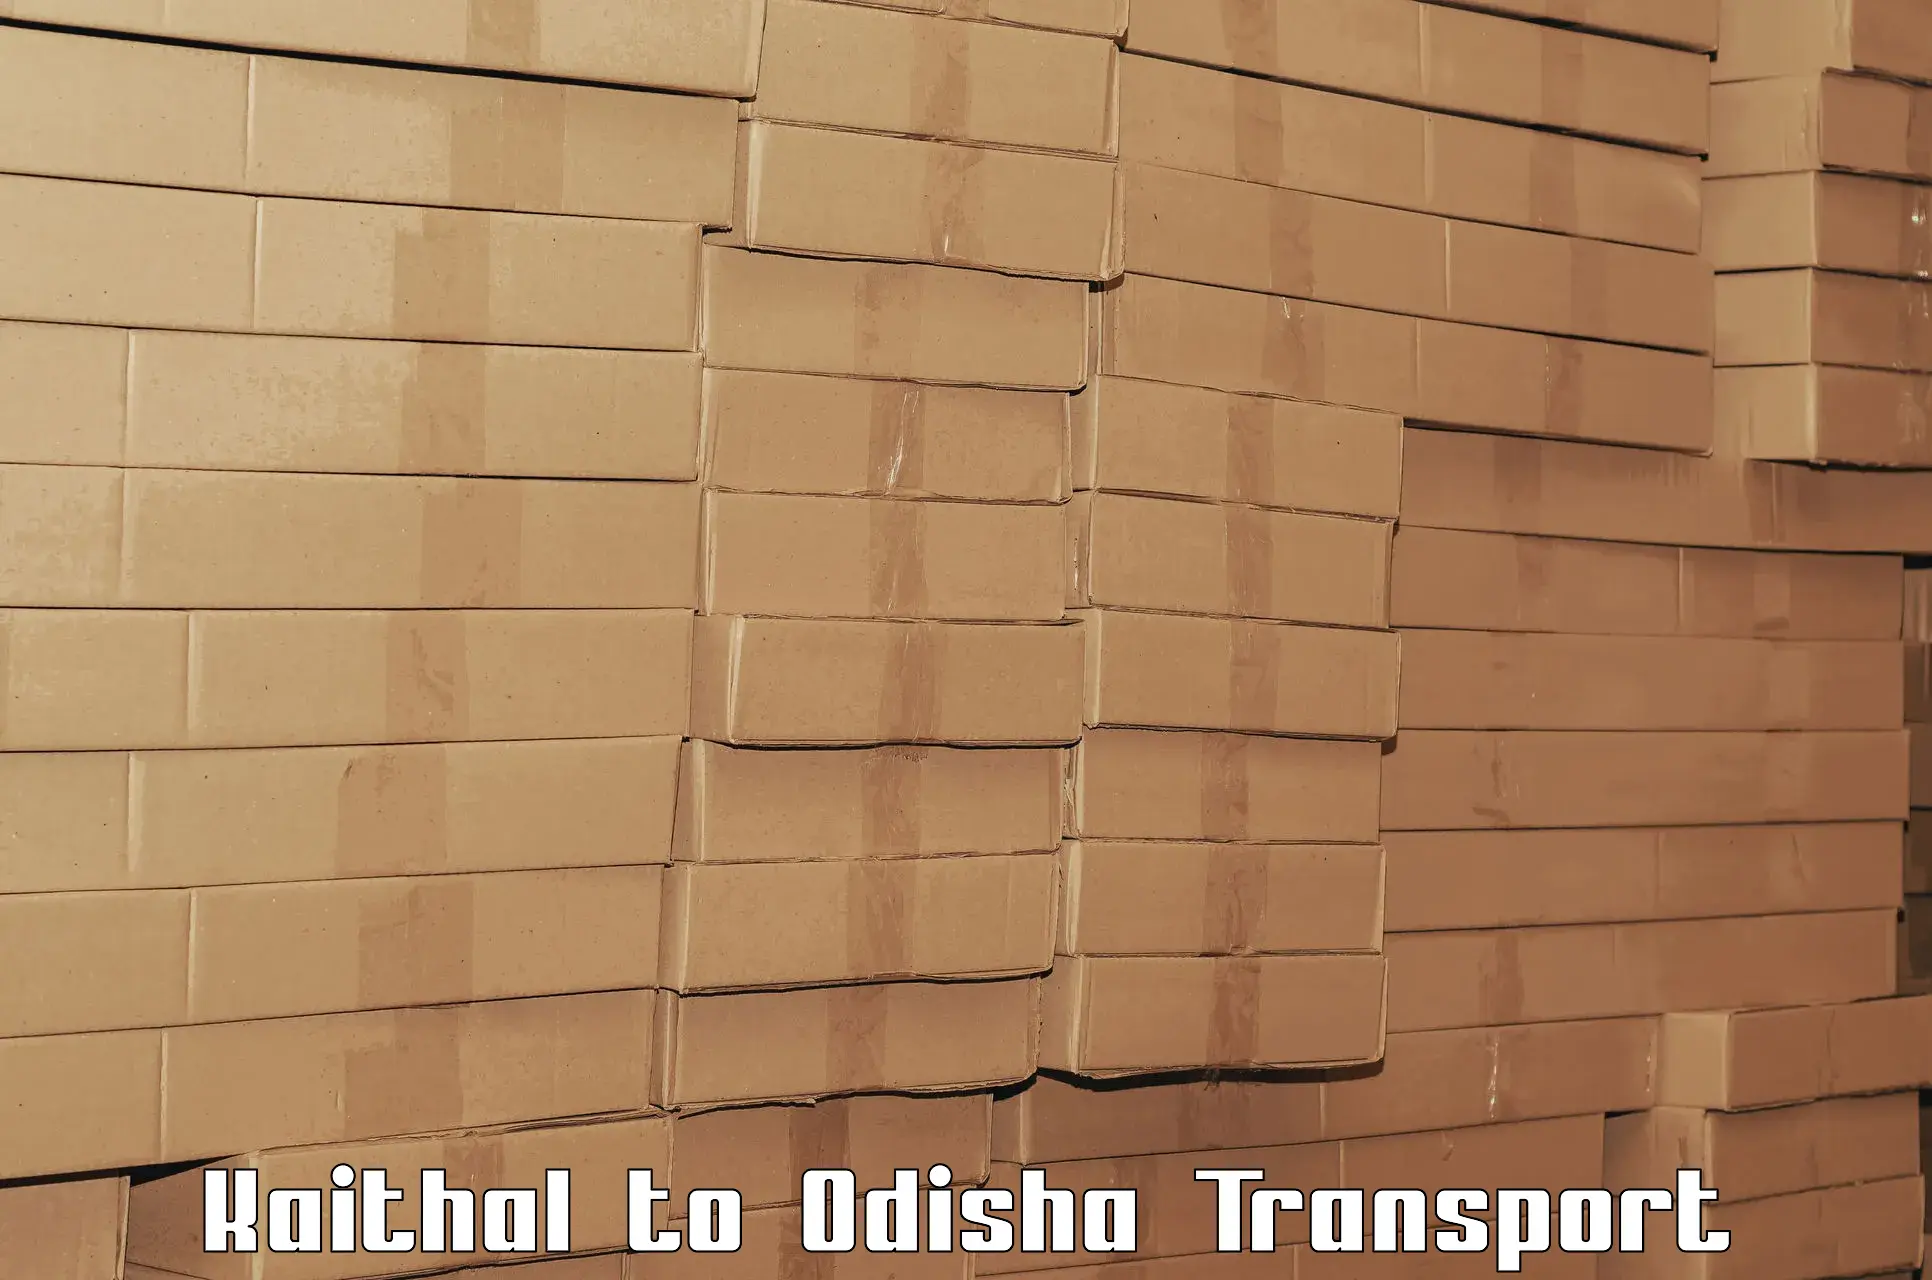 Transport in sharing Kaithal to Odisha